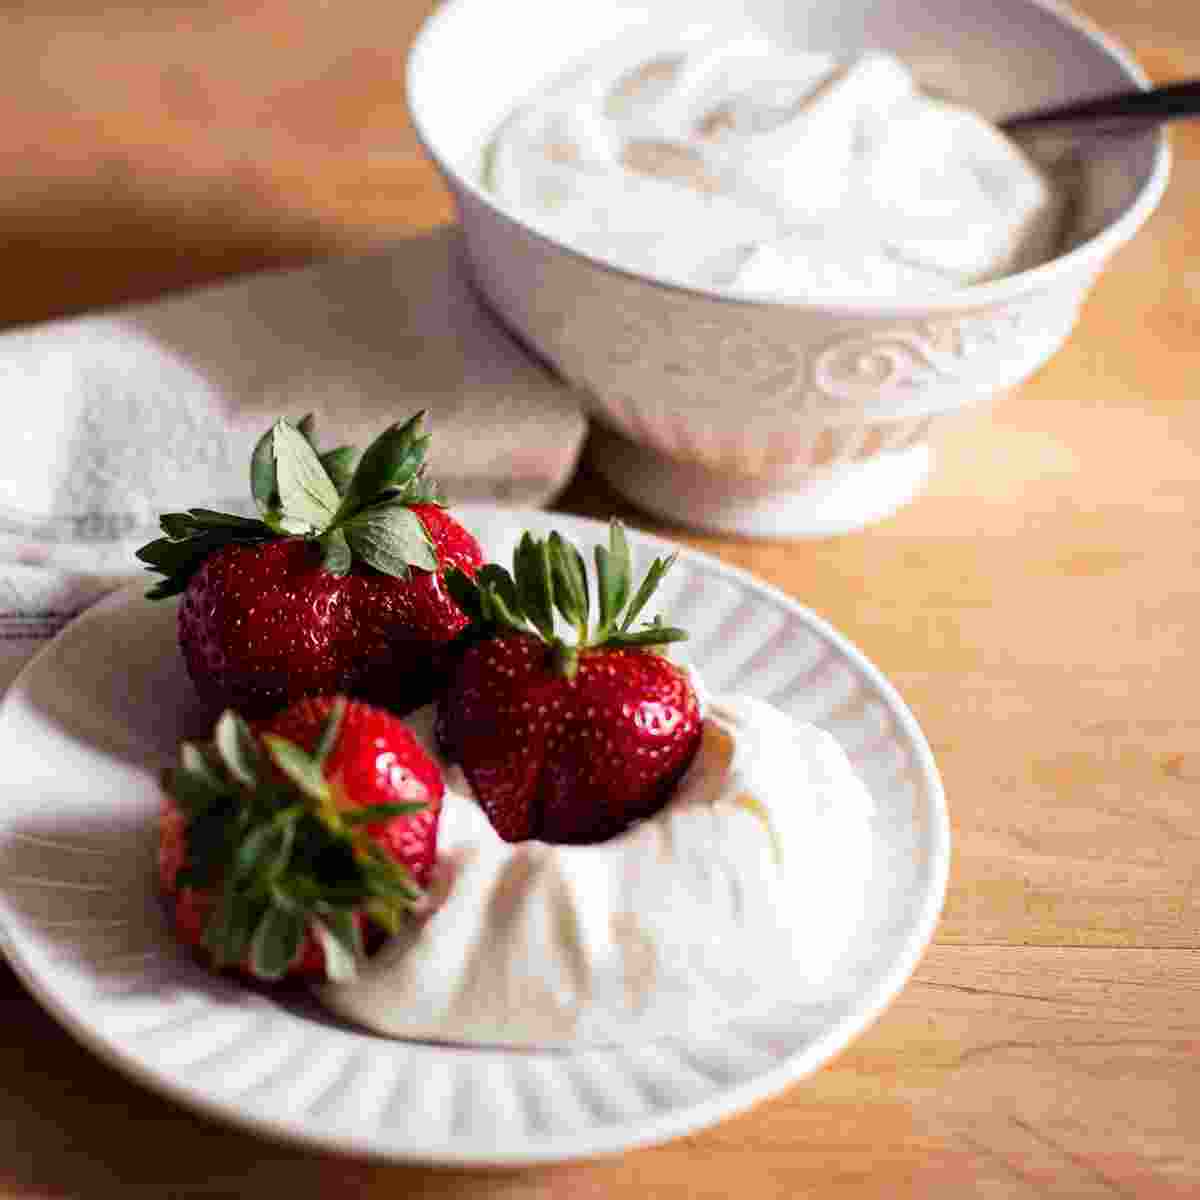 A plate of Strawberries & a bowl oh homemade whip cream.